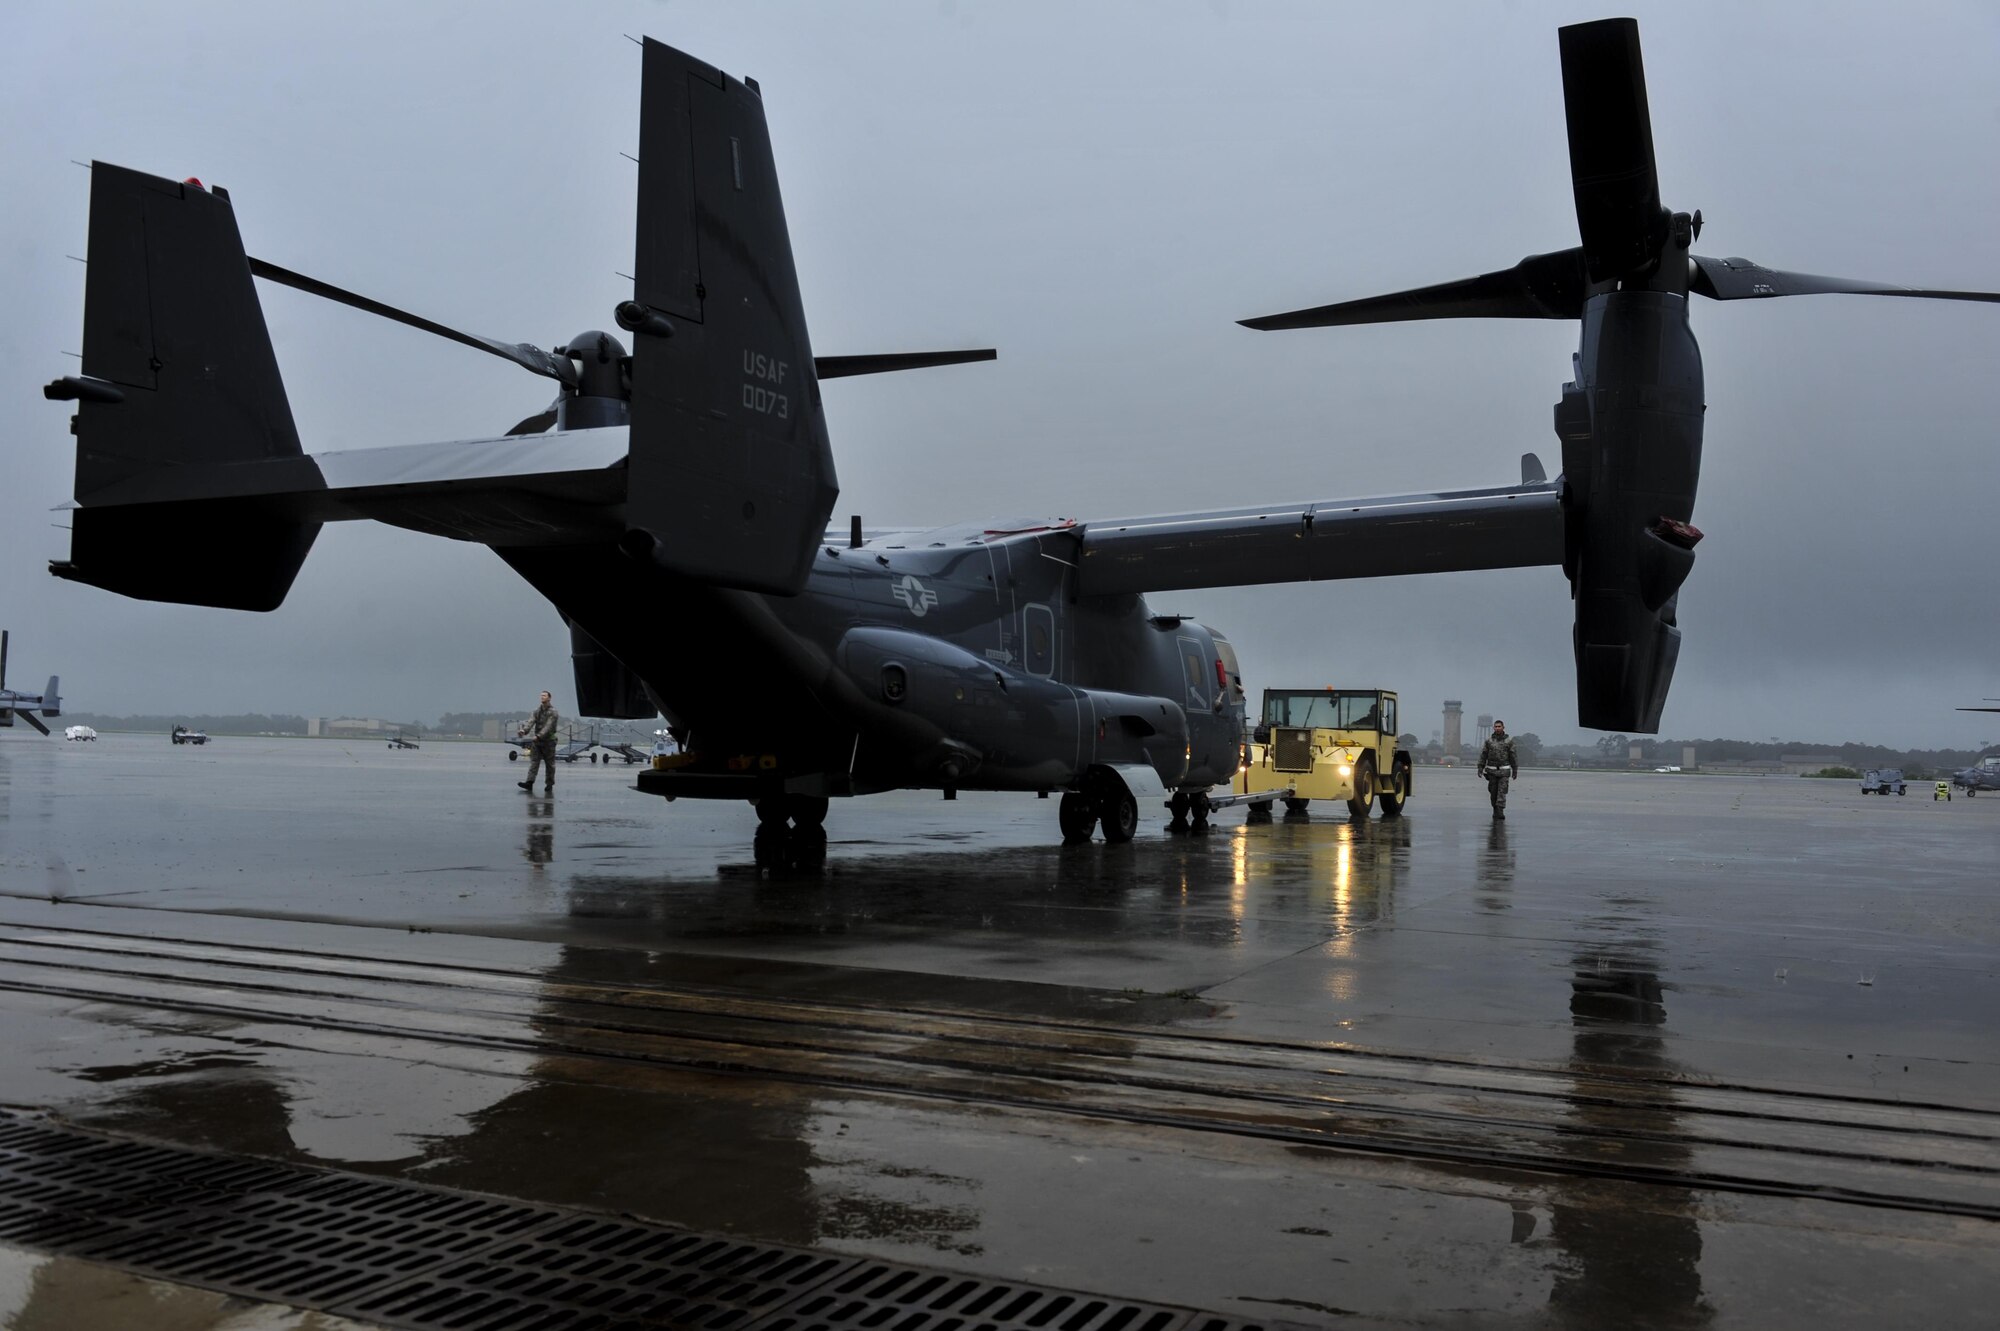 Crew chiefs with the 801st Special Operations Aircraft Maintenance Squadron tow a CV-22B Osprey tiltrotor aircraft into the Freedom Hangar at Hurlburt Field, Fla., Aug. 11, 2016. The Osprey combines vertical takeoff, hover and vertical landing capabilities of a helicopter with the long-range, fuel efficiency and speed characteristics of a turboprop aircraft. (U.S. Air Force photo by Airman Dennis Spain)